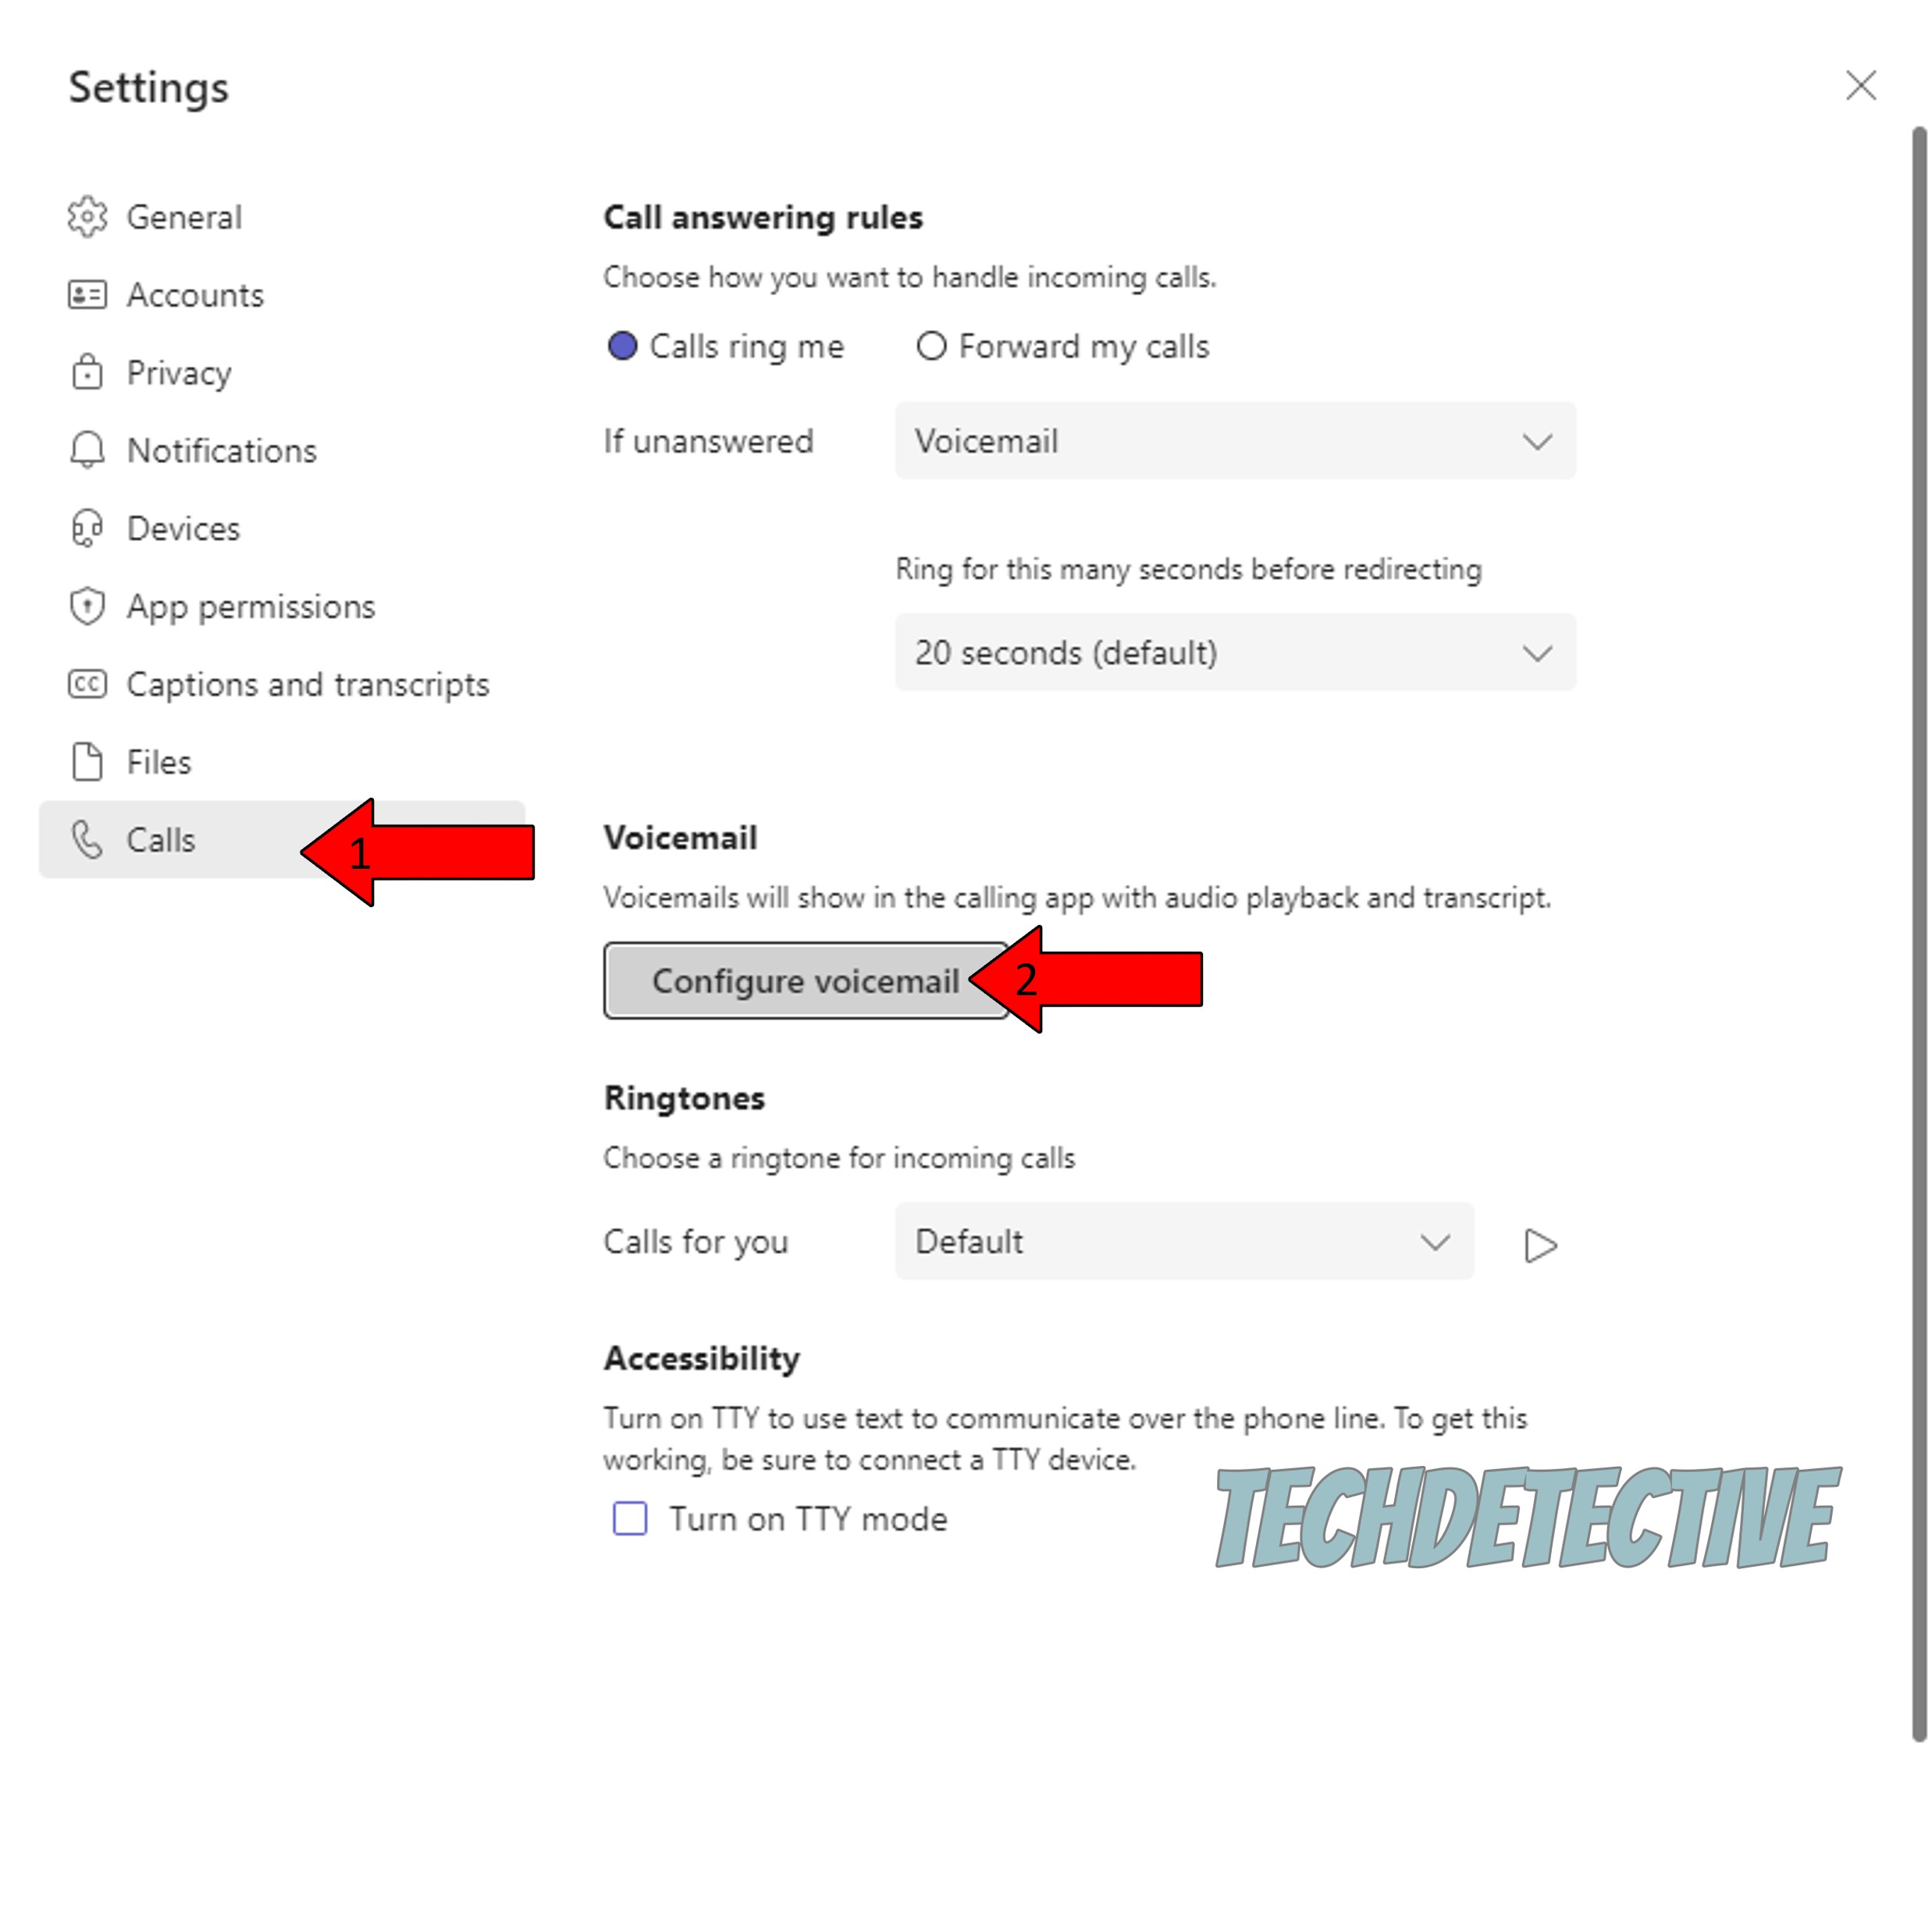 How to configure voicemail in Microsoft Teams